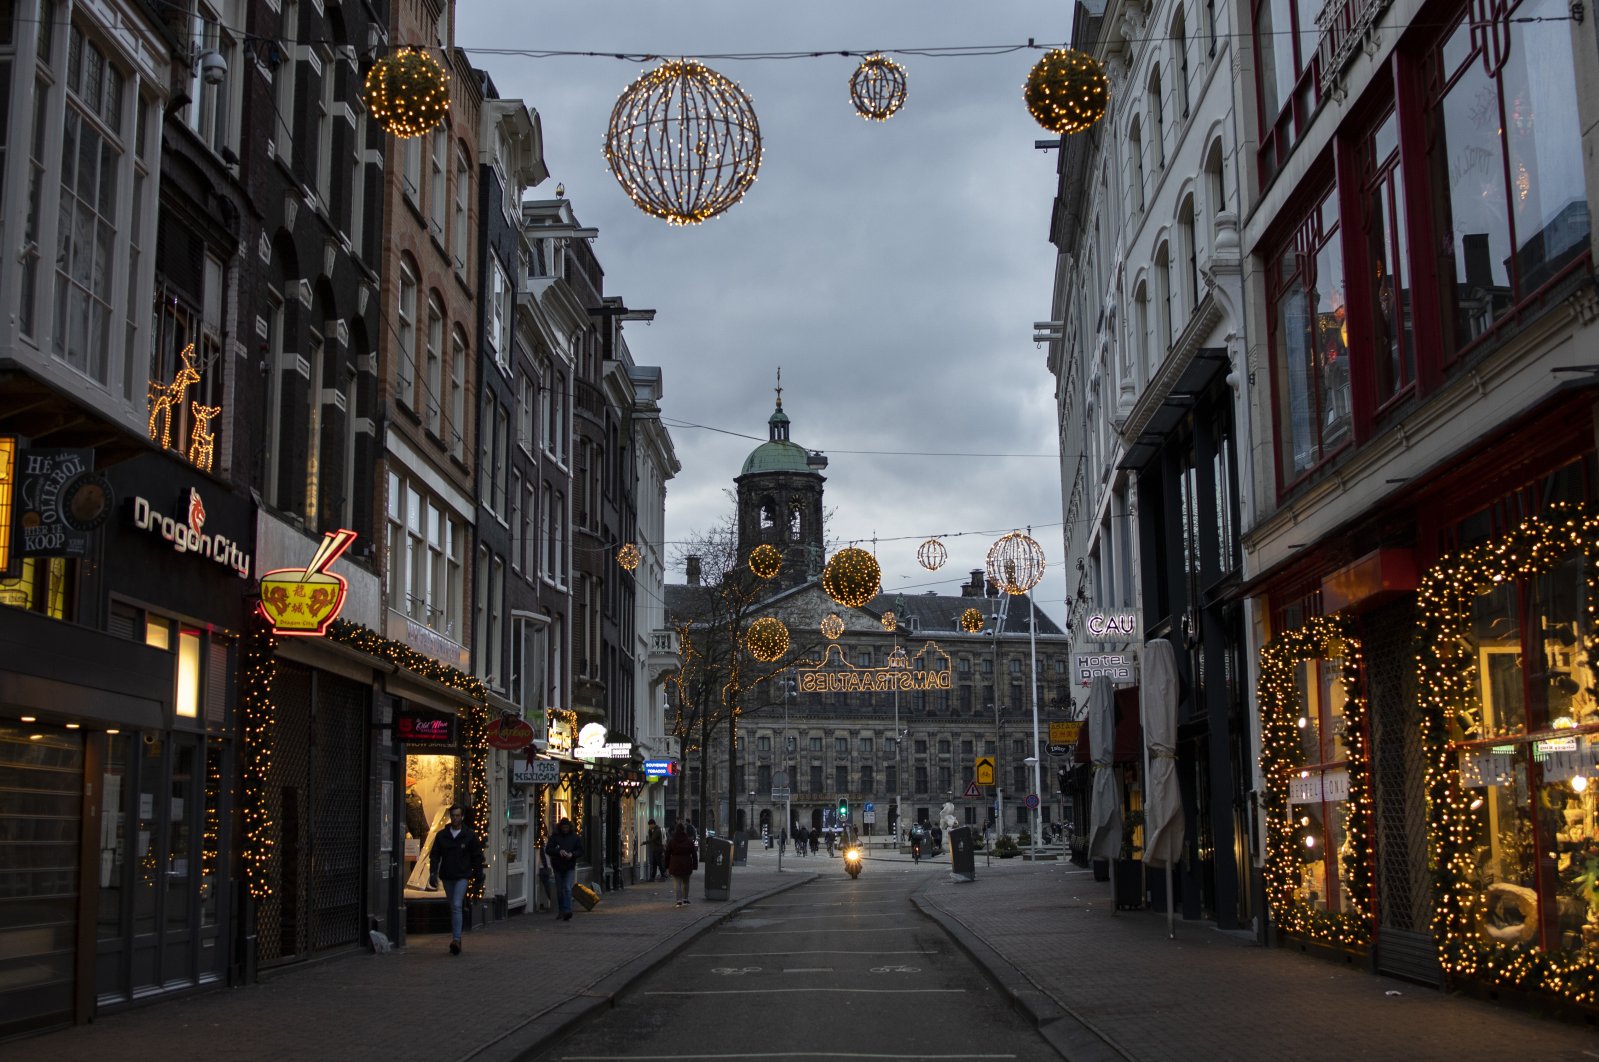 Closed stores on Dam street and the Royal Palace on Dam Square (C) in Amsterdam, Jan. 14, 2021. (AP Photo)